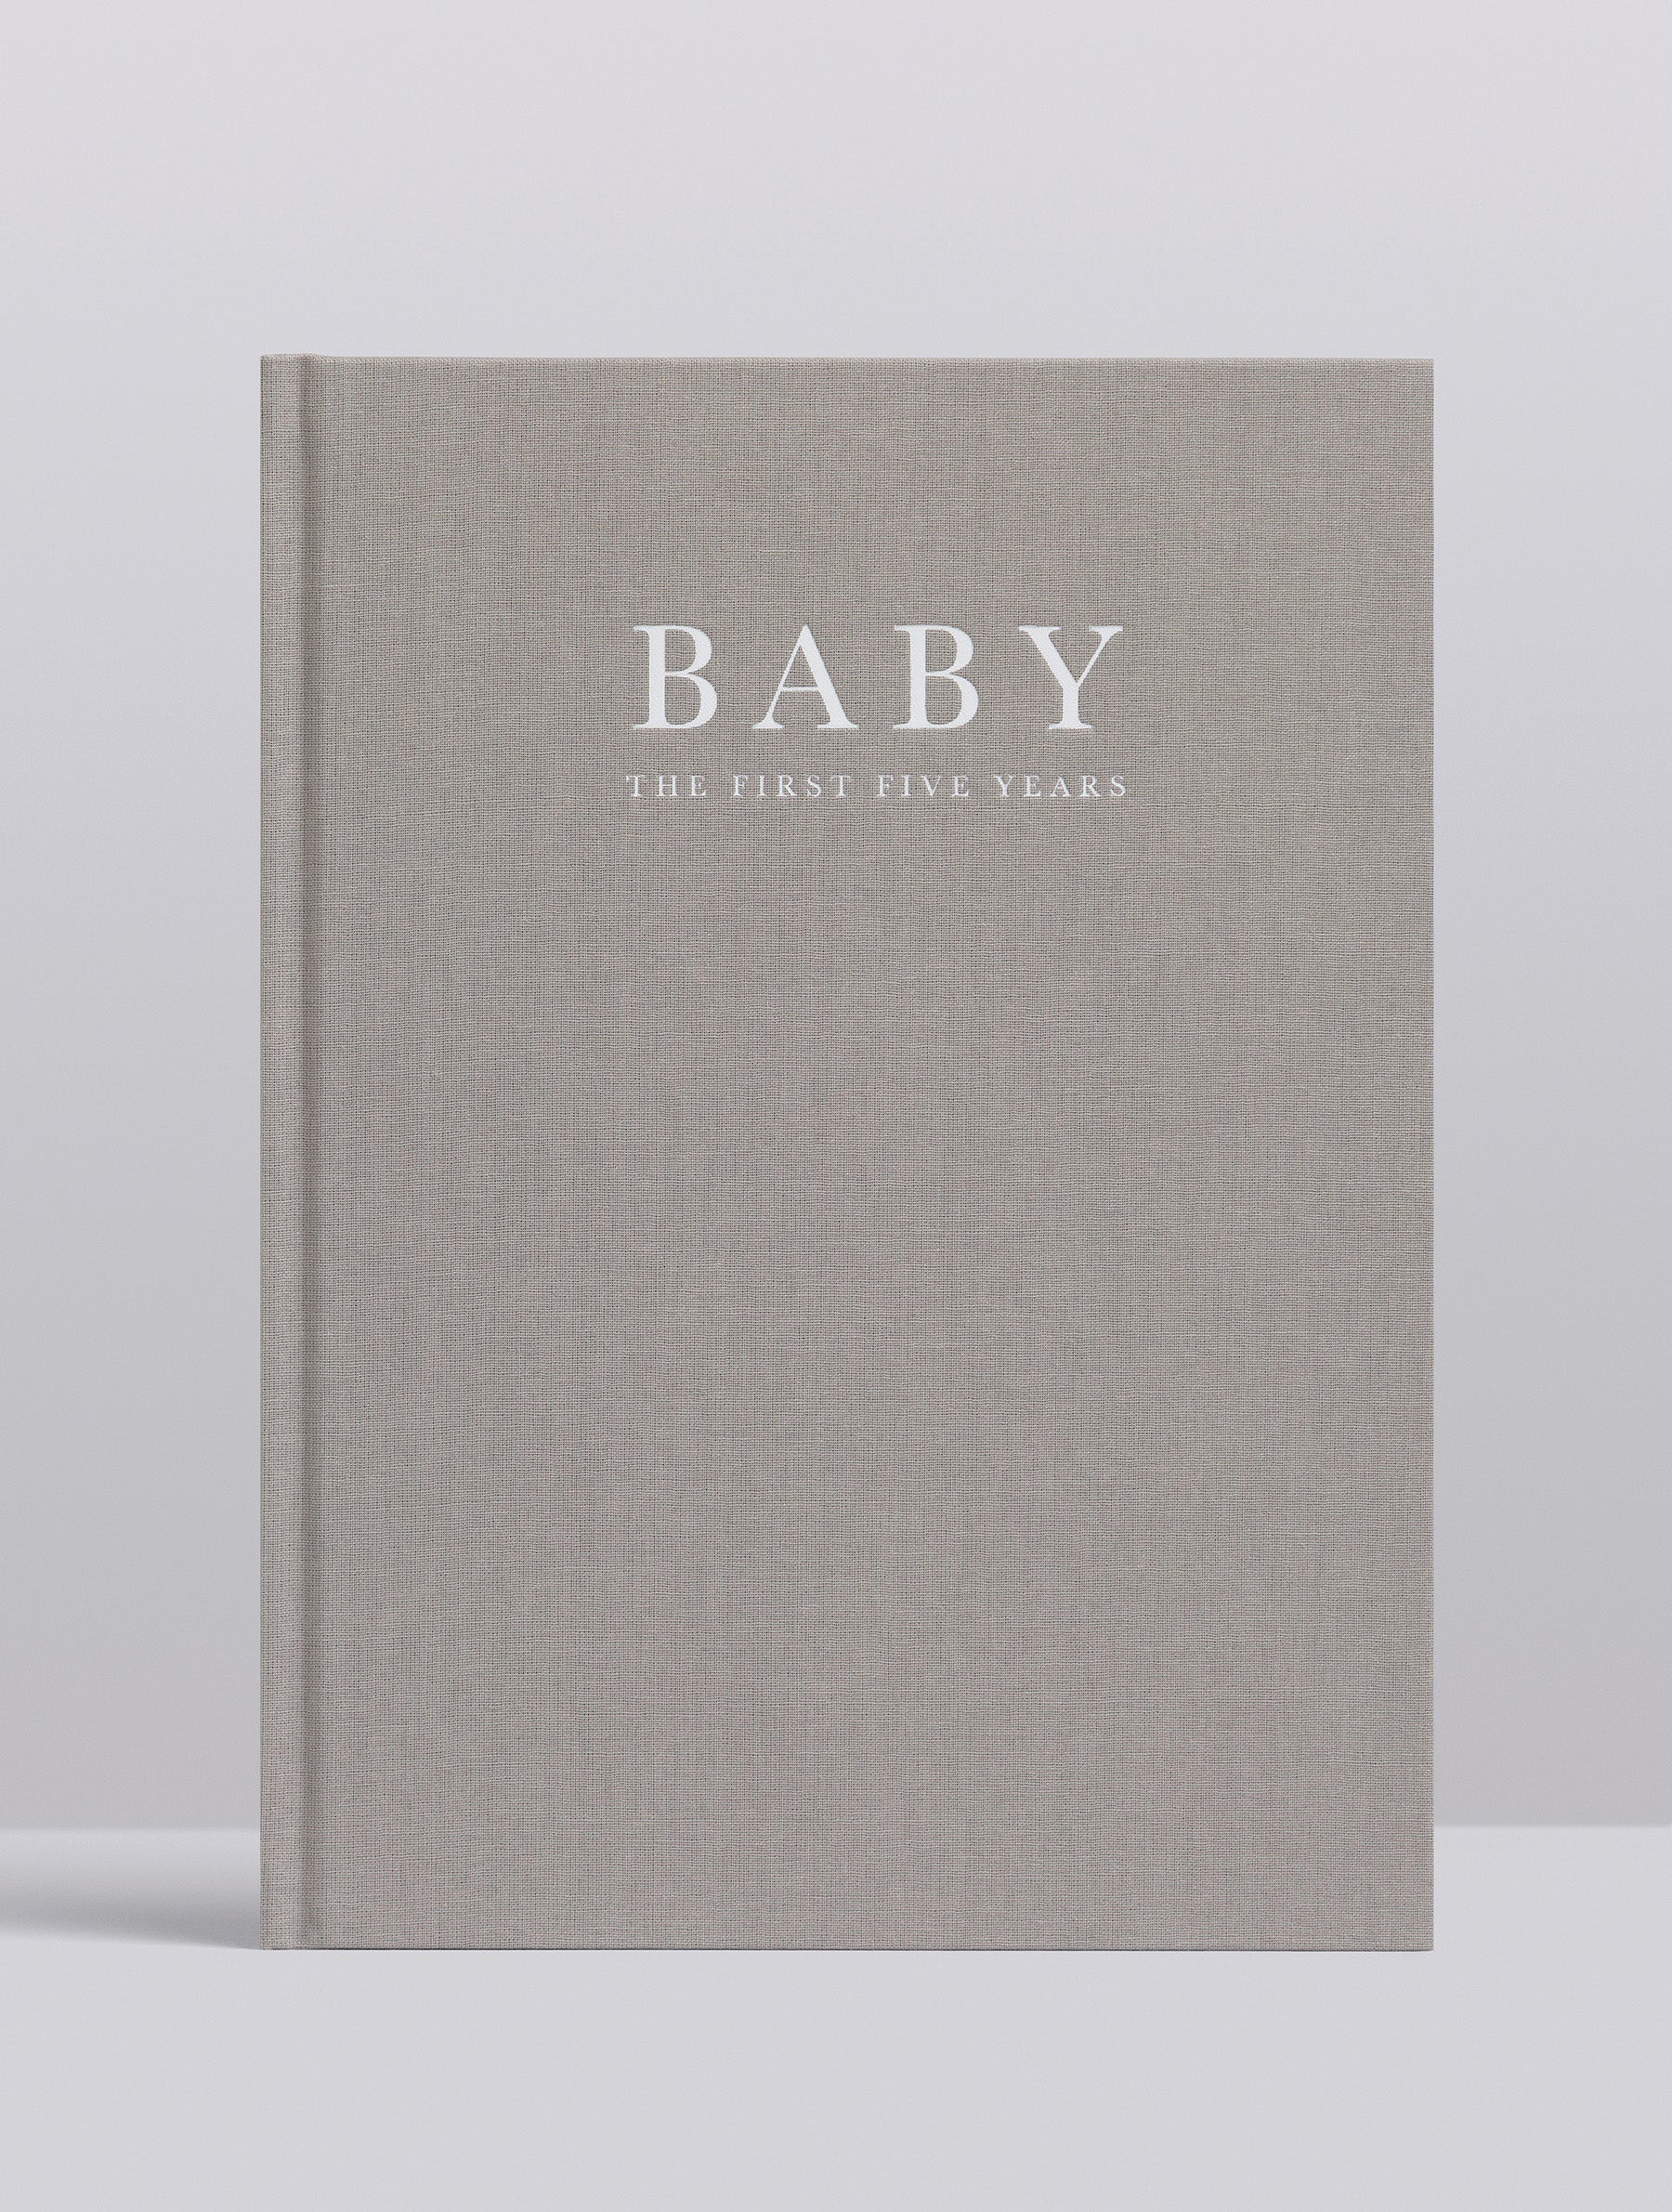 Baby record book journal in grey